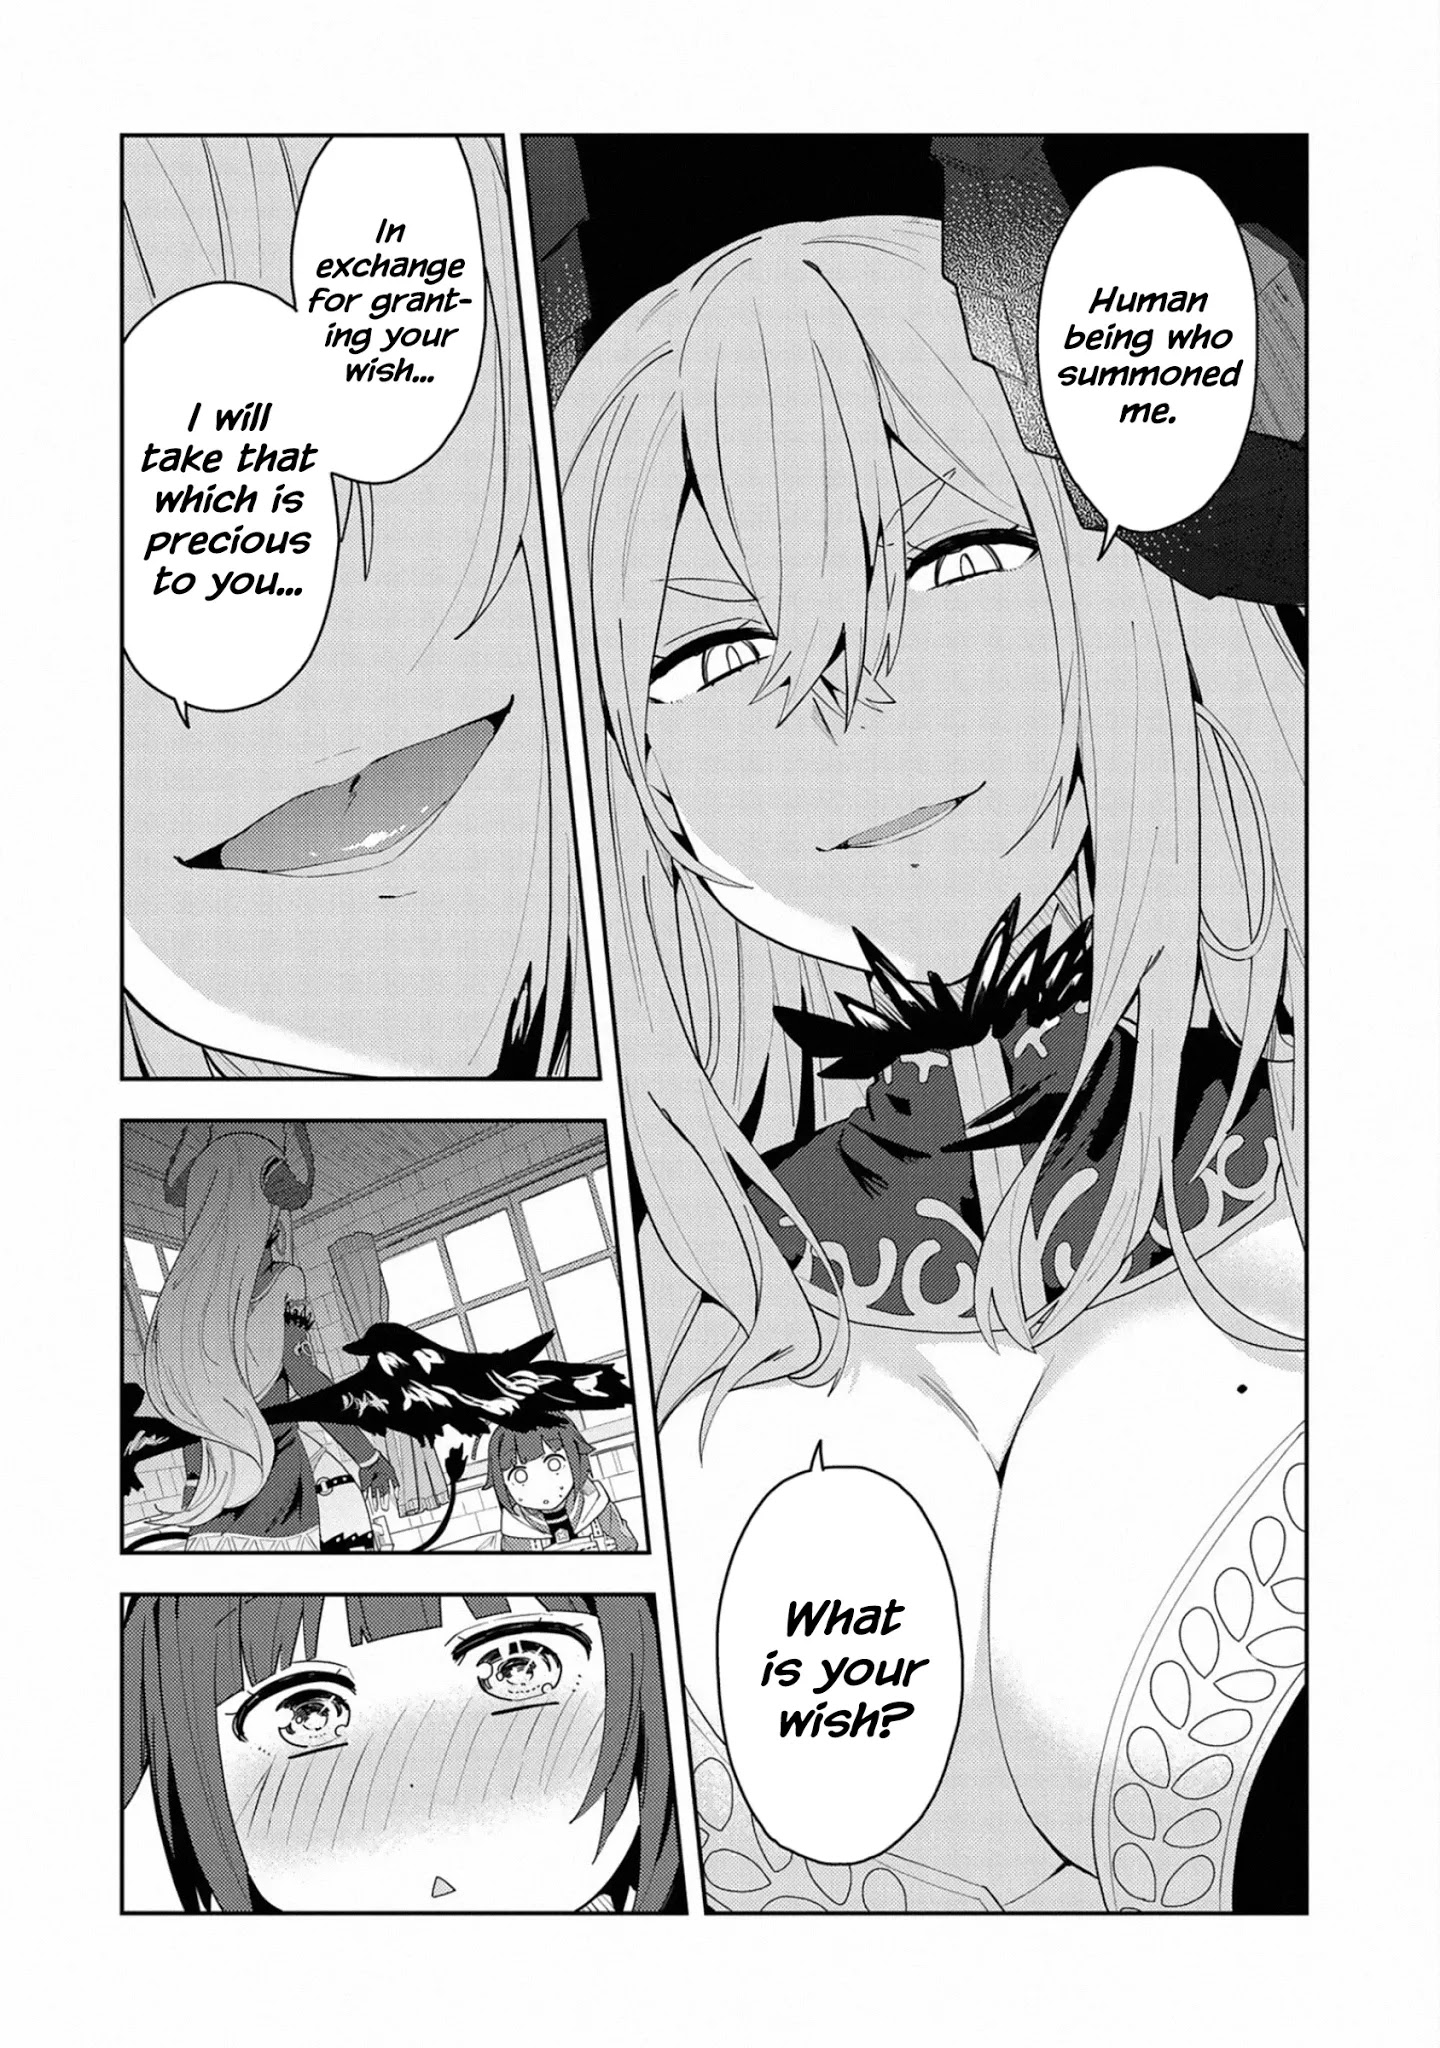 I Summoned The Devil To Grant Me A Wish, But I Married Her Instead Since She Was Adorable ~My New Devil Wife~ - Page 3